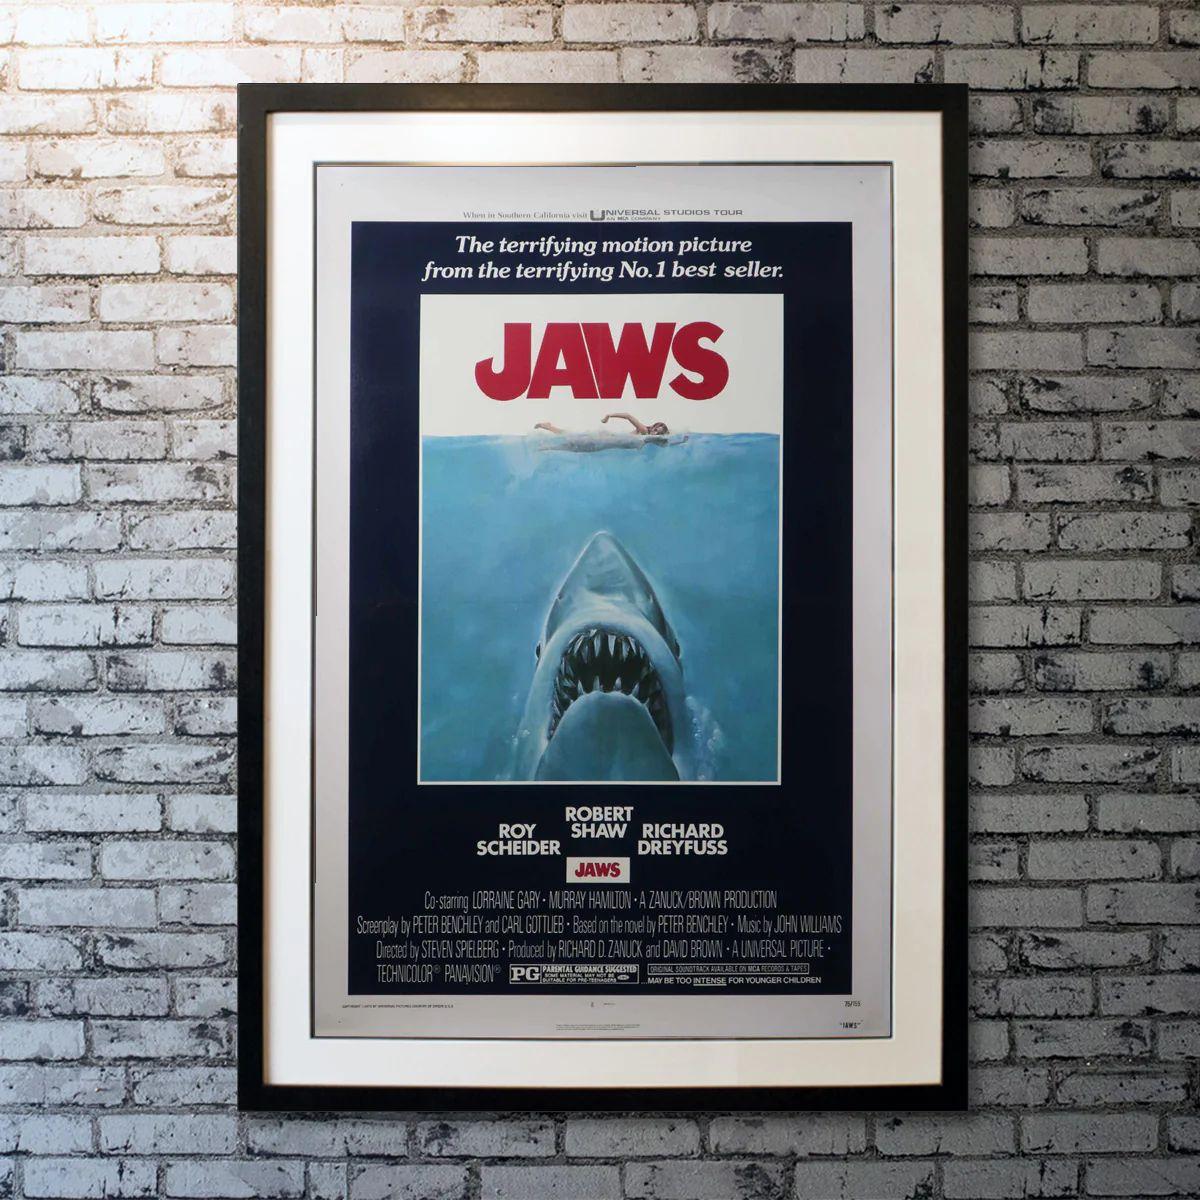 Jaws, Unframed Poster, 1975

Original One Sheet (27 X 40 Inches). When a killer shark unleashes chaos on a beach community off Cape Cod, it's up to a local sheriff, a marine biologist, and an old seafarer to hunt the beast down.

Additional